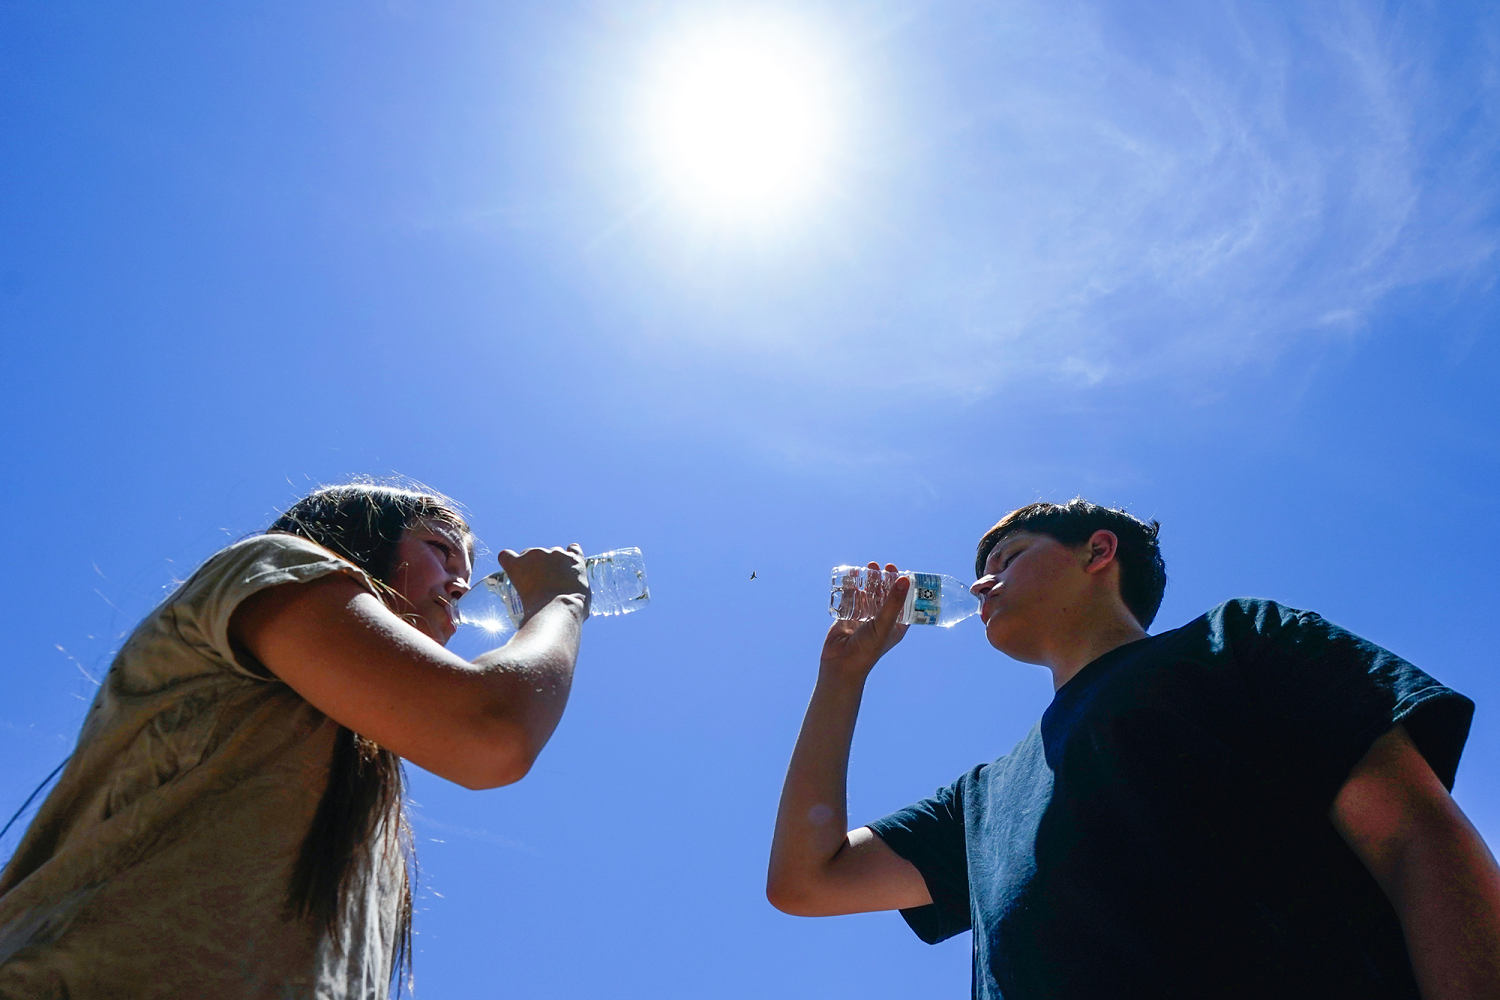 New tools from NOAA and CDC show people their risk from heat, as another hot summer looms